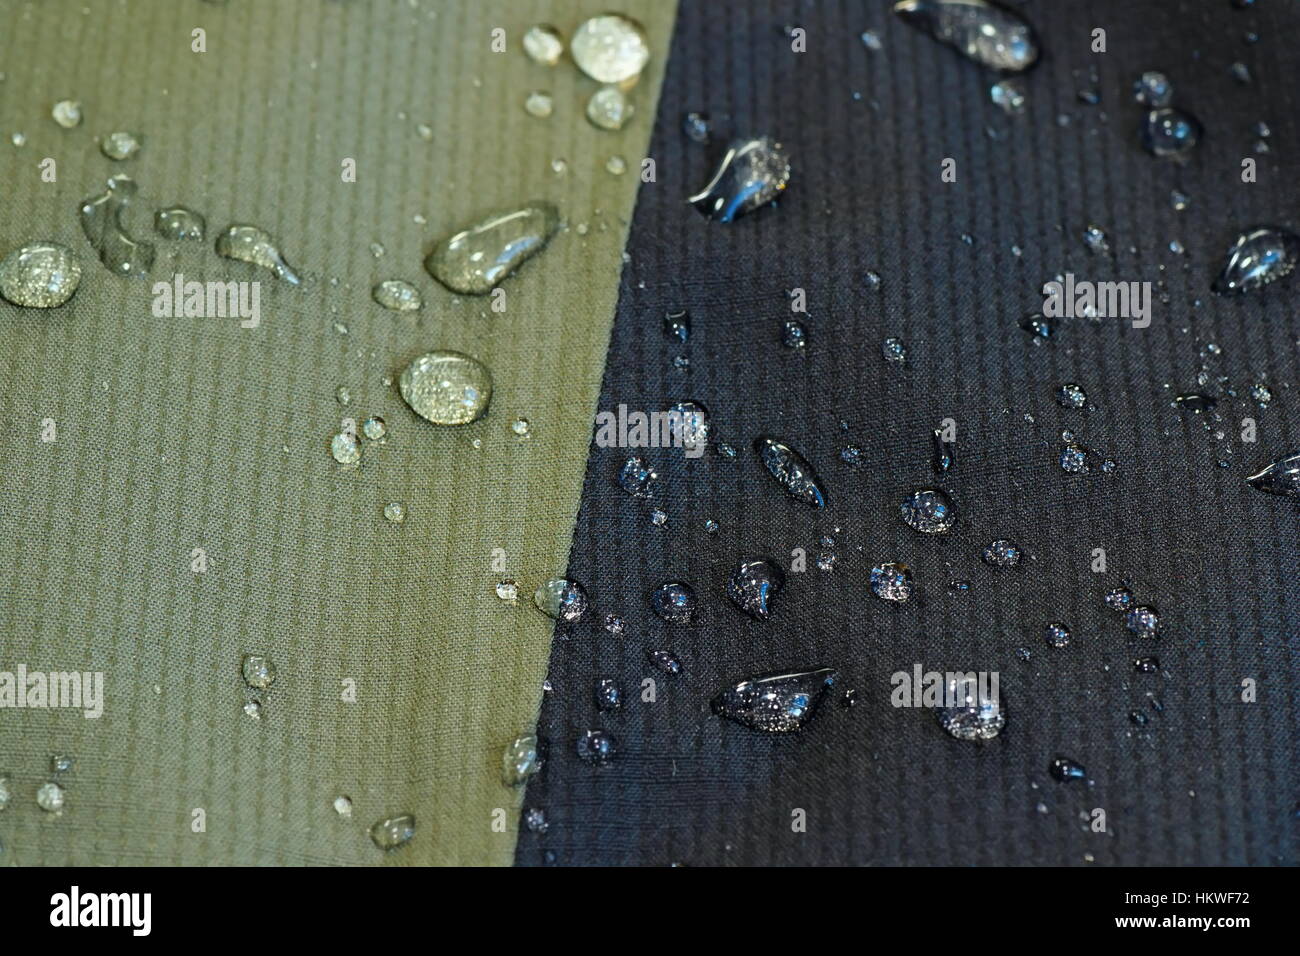 water repellent material of a jacket, waterdrops on surface Stock Photo